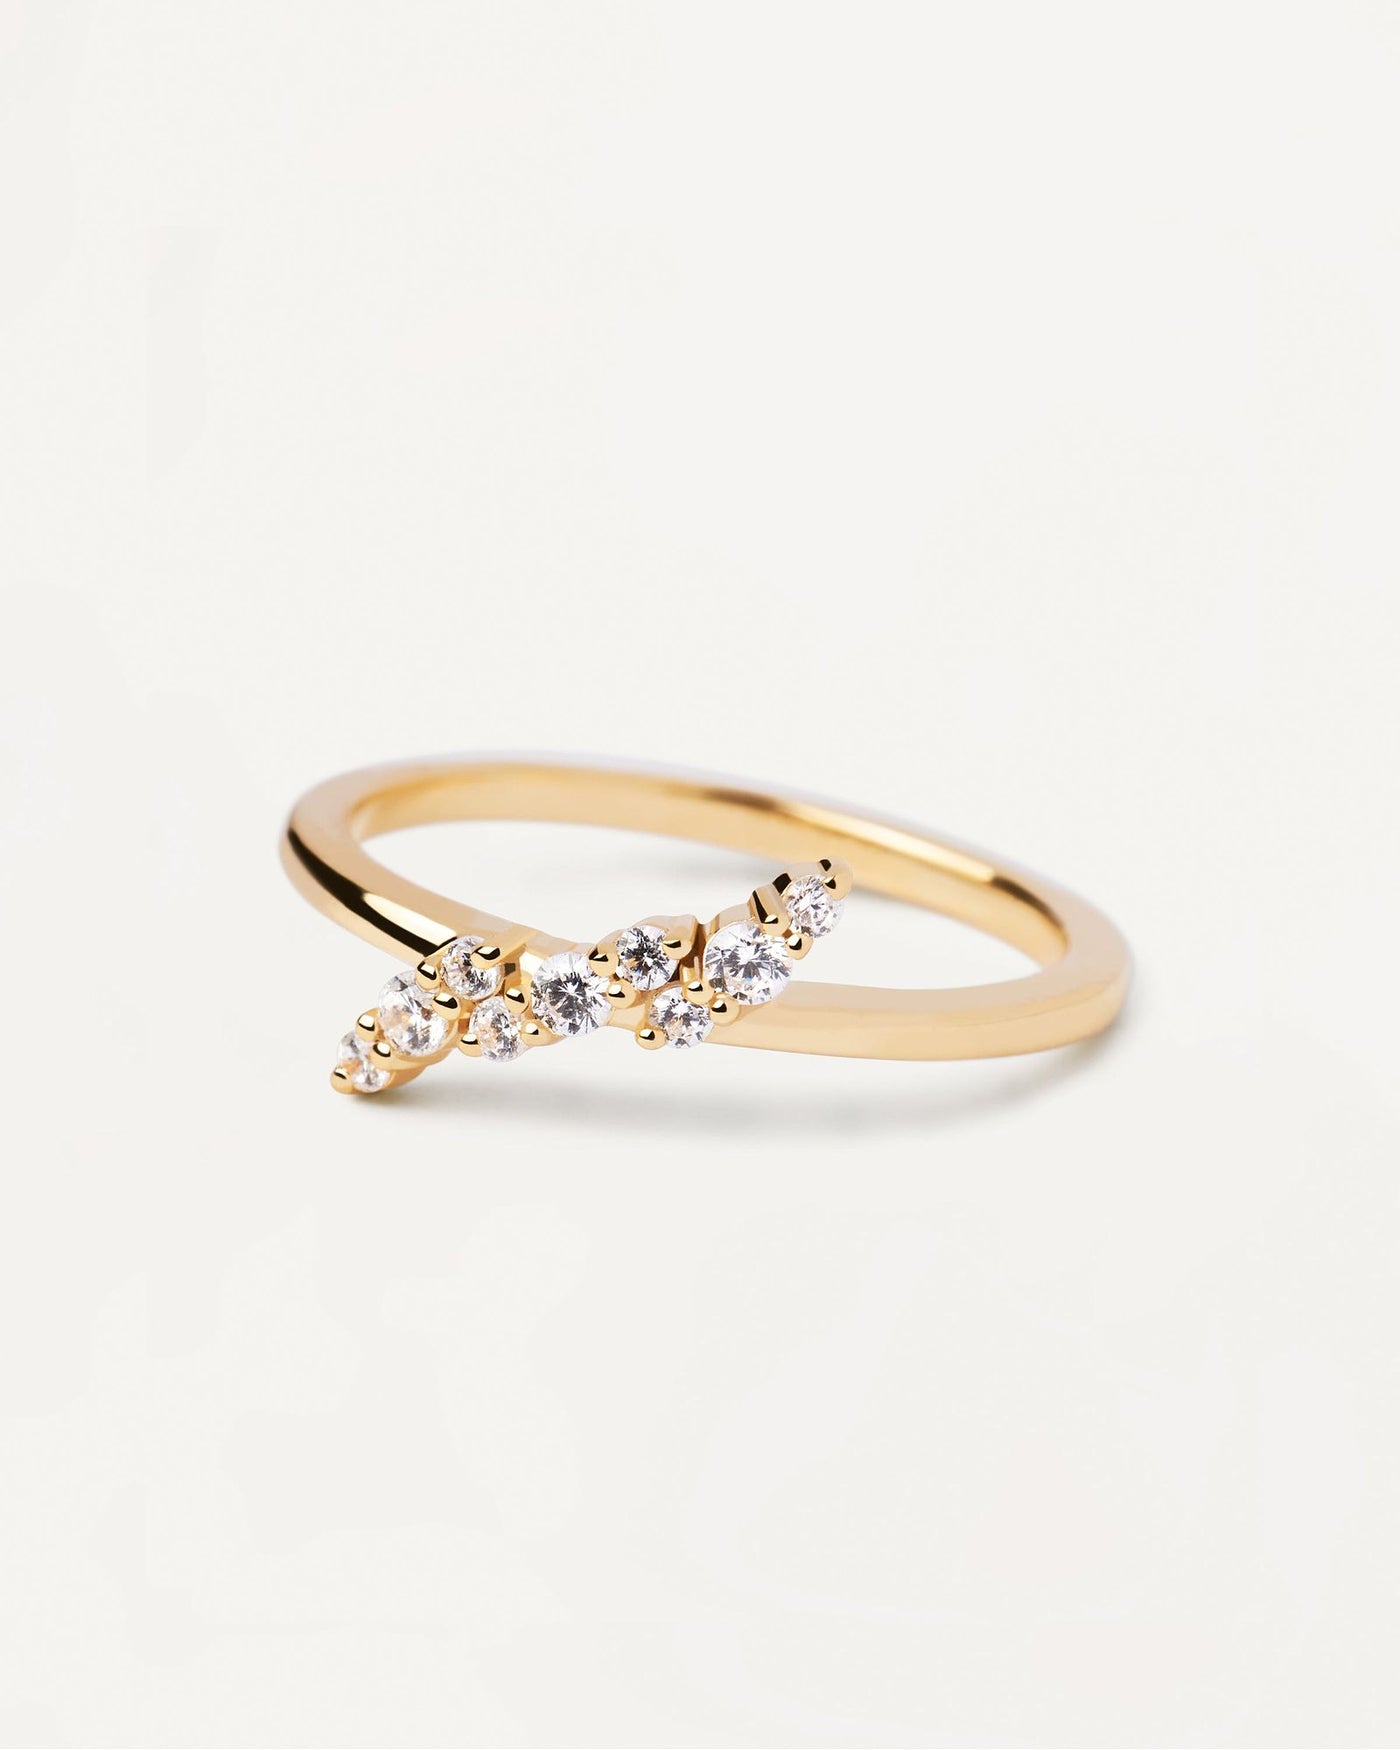 2024 Selection | Natura Ring. Basic gold-plated silver ring with small white crystals. Get the latest arrival from PDPAOLA. Place your order safely and get this Best Seller. Free Shipping.